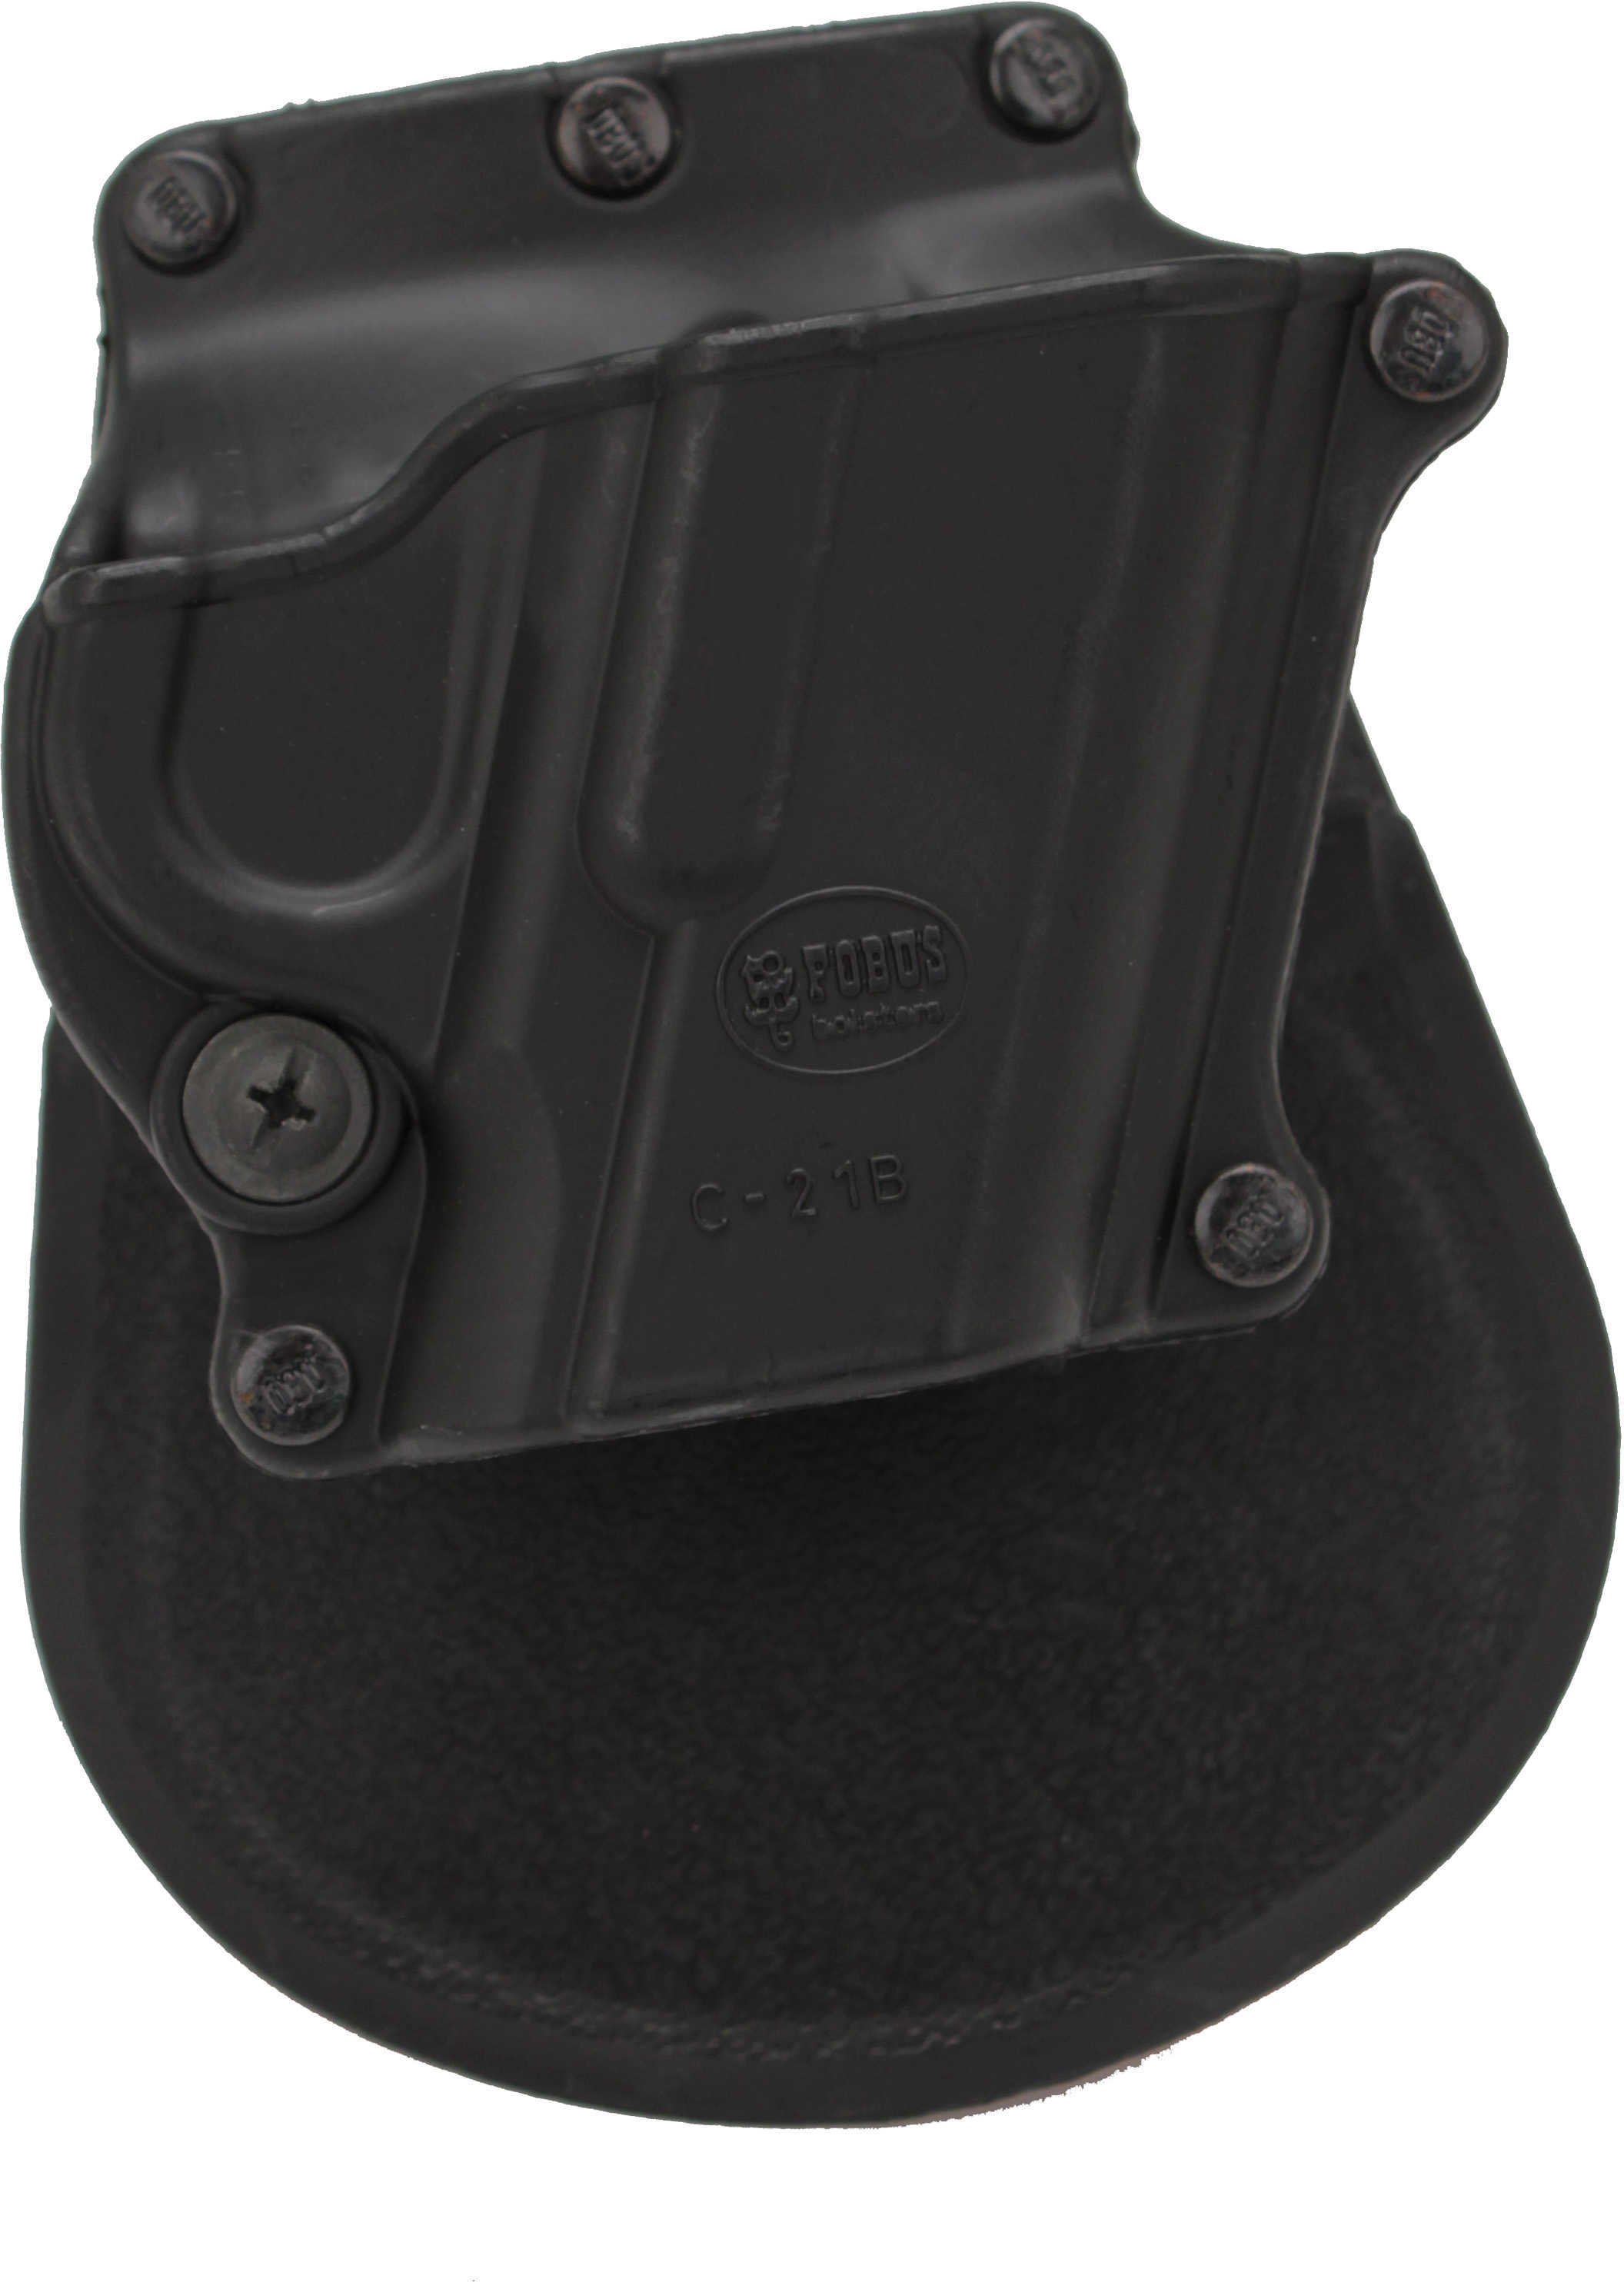 Fobus Standard Paddle Holster Fits Colt/Browning/Kahr & Para Compact Pistols Md: C21B